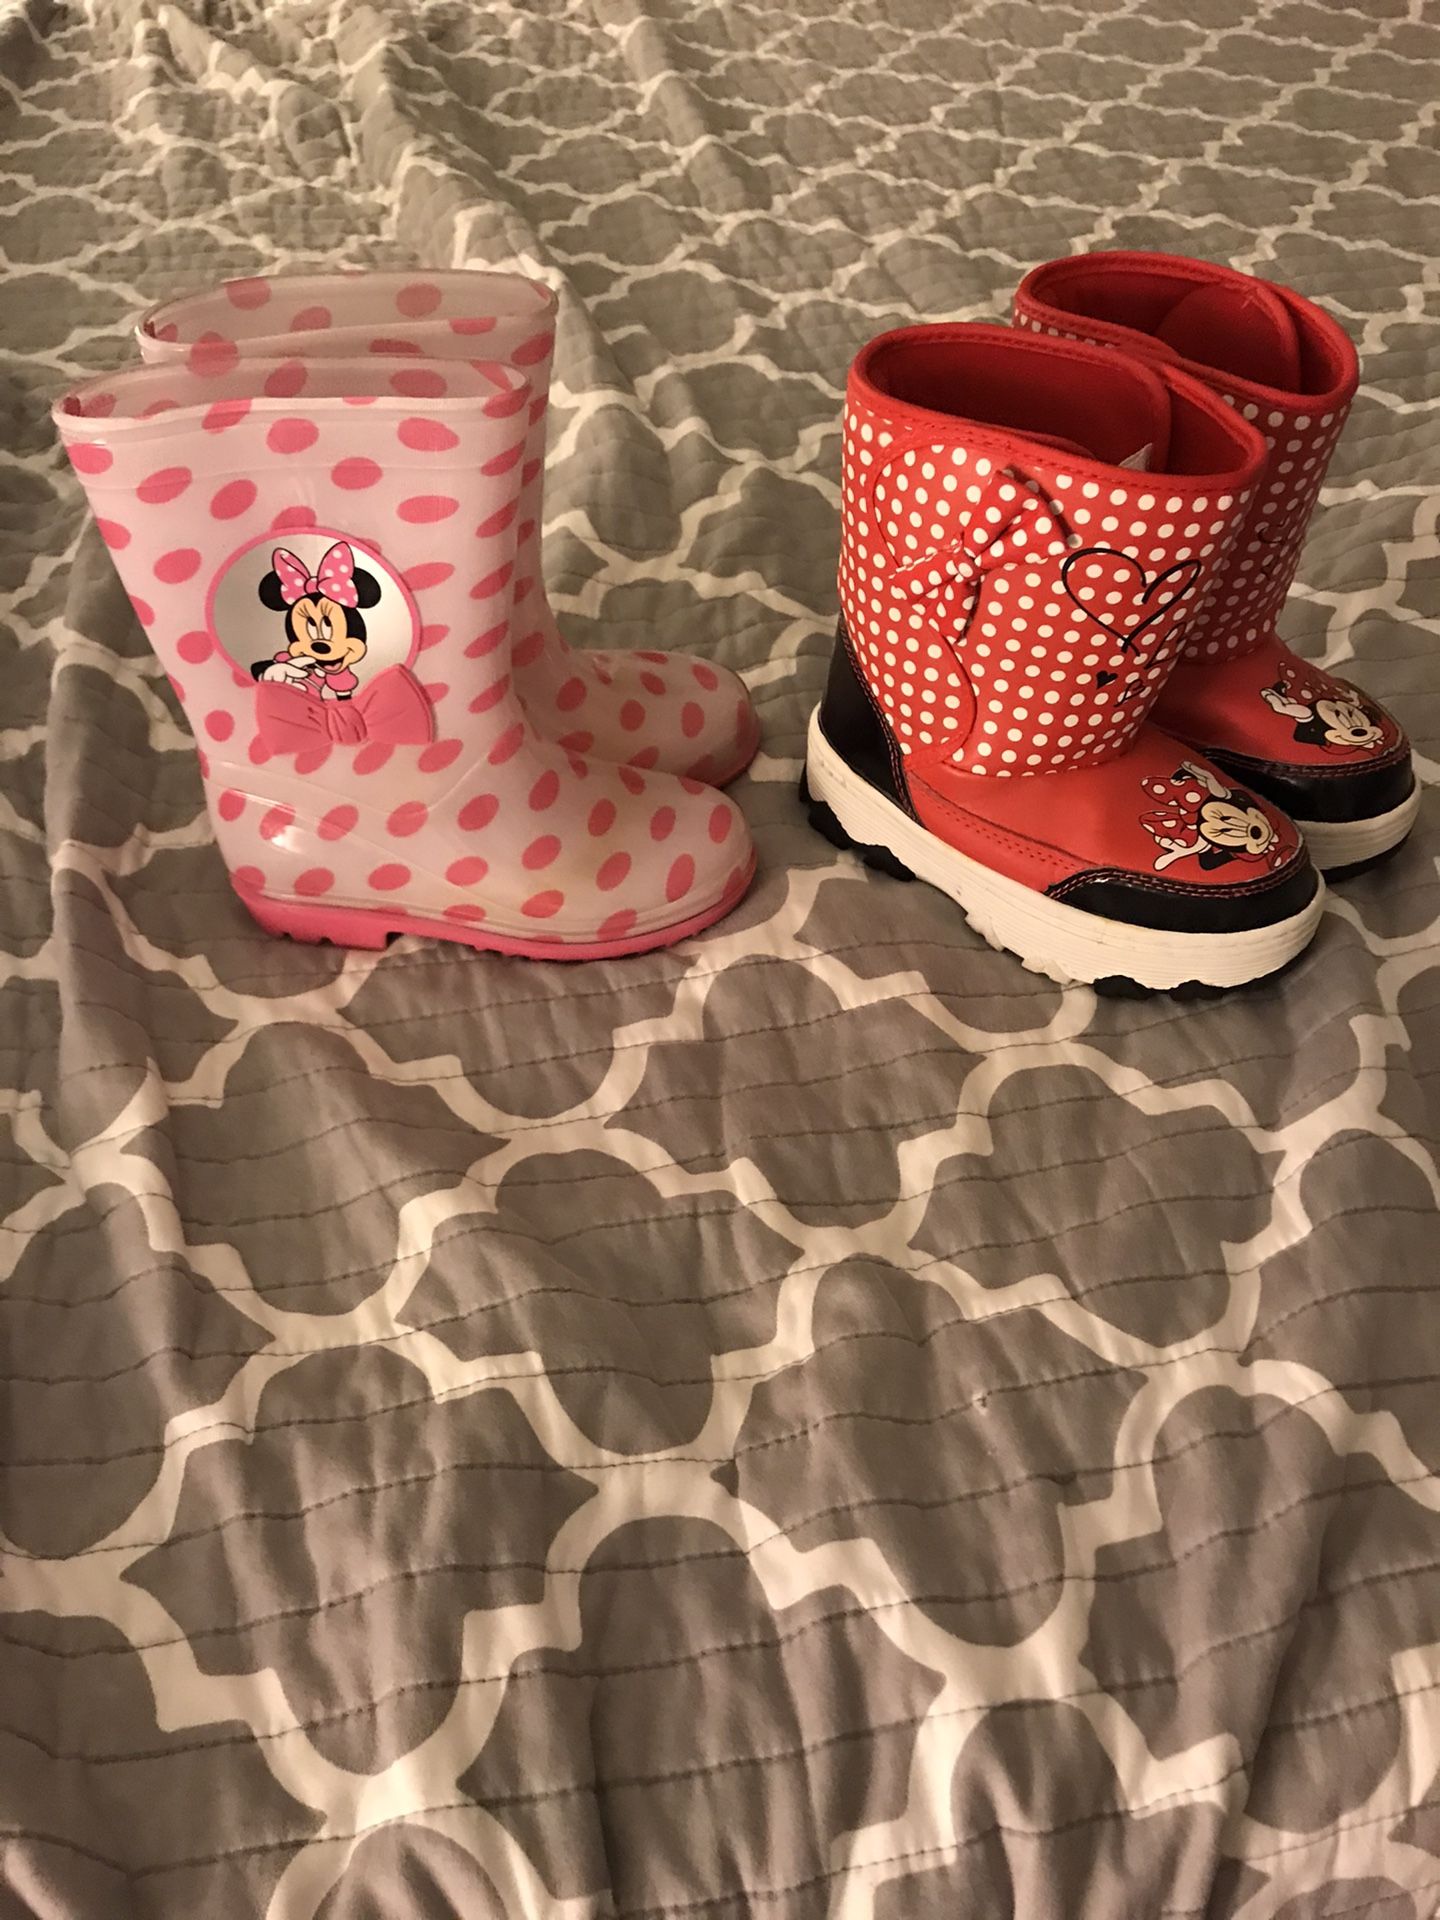 Minnie Mouse boots